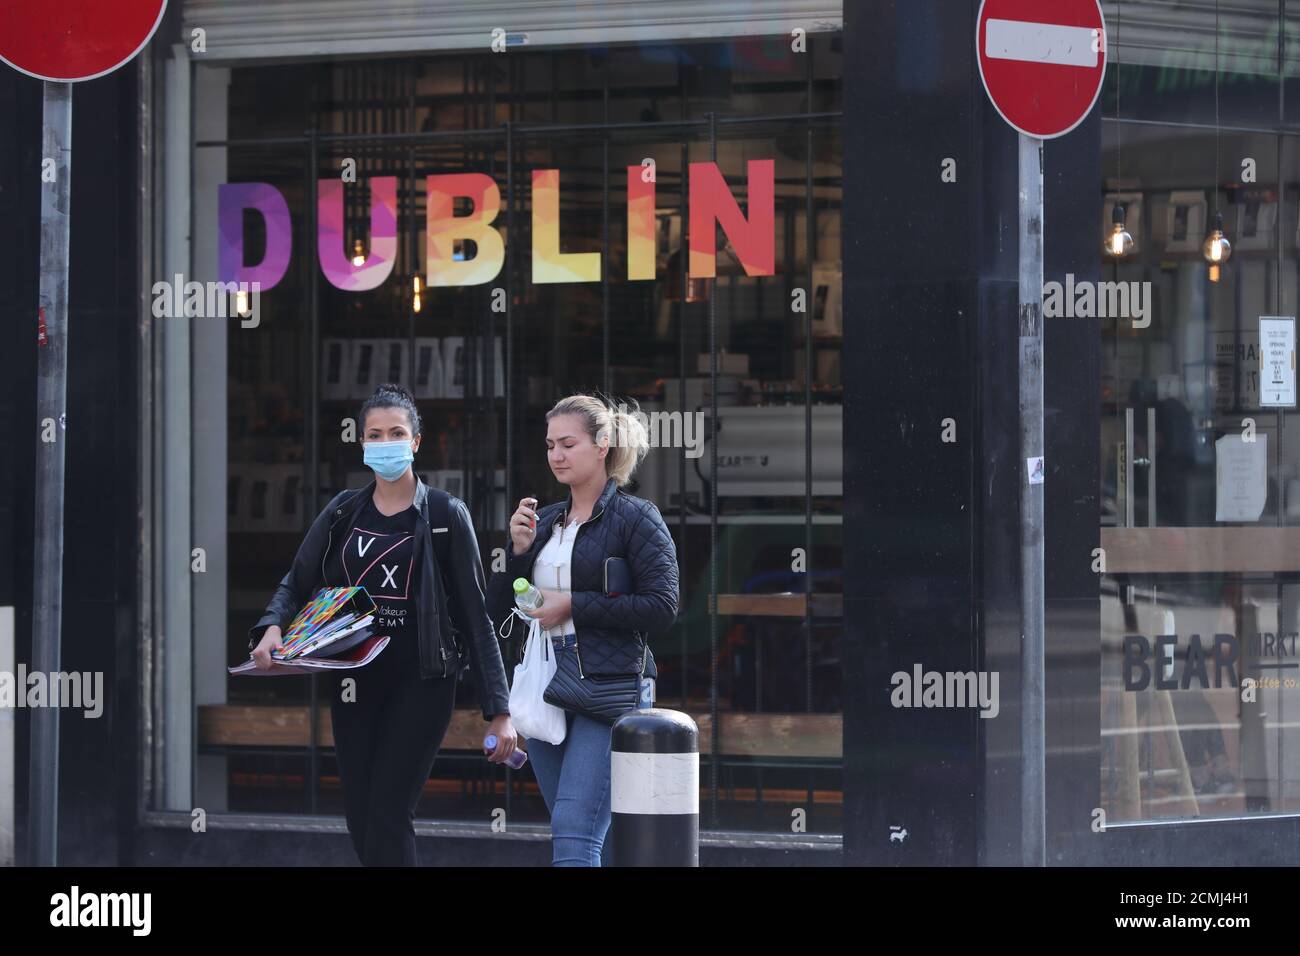 A person wearing a mask (left) in Dublin city centre, amid calls for public health authorities to publish further details of Covid-19 outbreaks in businesses and public settings. Stock Photo